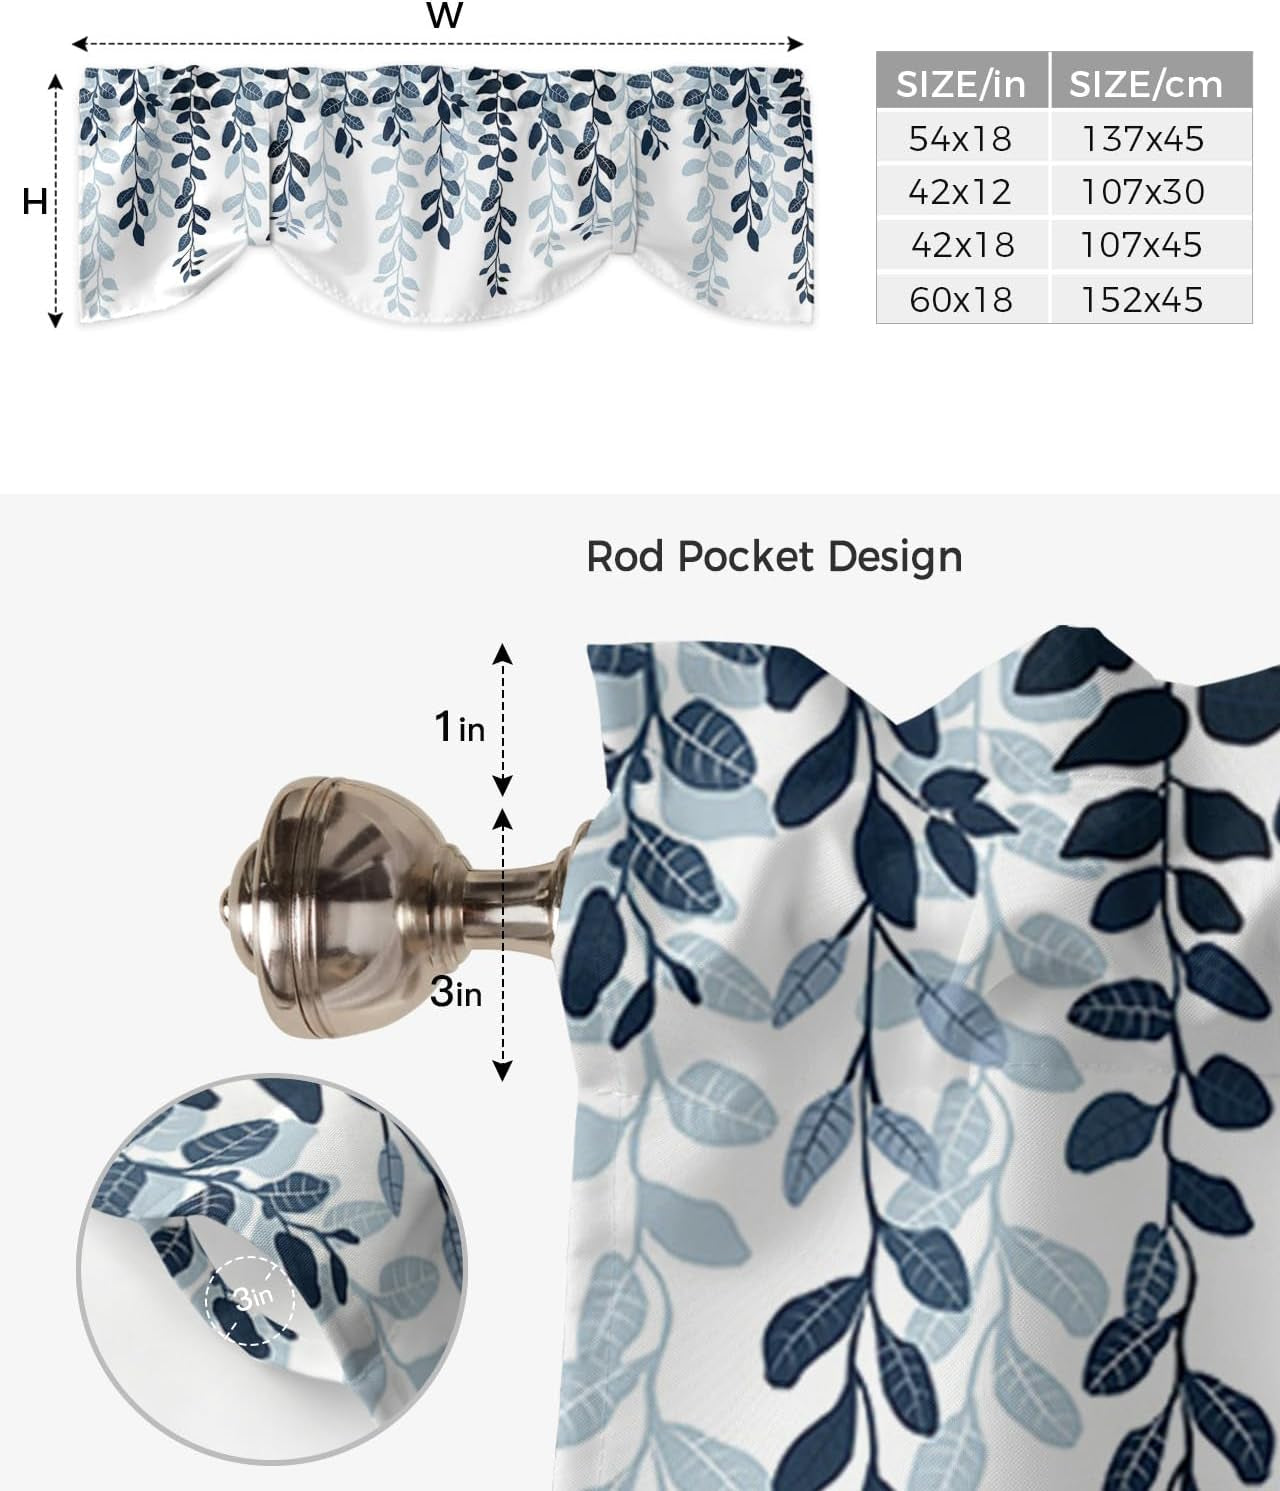 Navy Blue Botanical Tie up Valance Curtains for Windows, Ombre Abstract Art Kitchen Curtains Window Treatments, Pastoral Leaf Short Window Shades Valances for Bedroom Bathroom Cafe 54"X18"